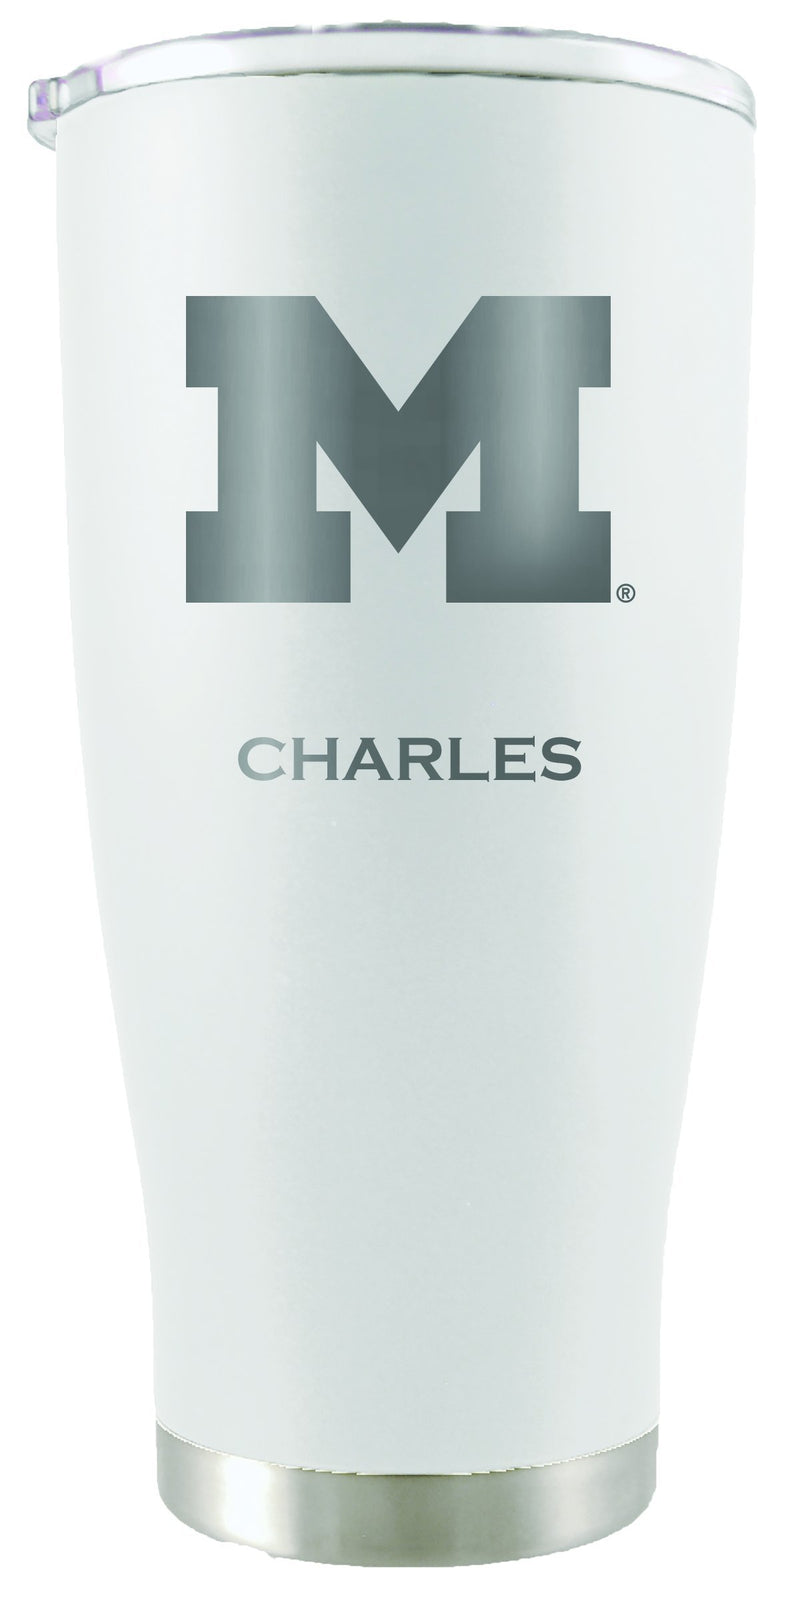 20oz White Personalized Stainless Steel Tumbler | Michigan Wolverines
COL, CurrentProduct, Drinkware_category_All, MH, Michigan Wolverines, Personalized_Personalized
The Memory Company